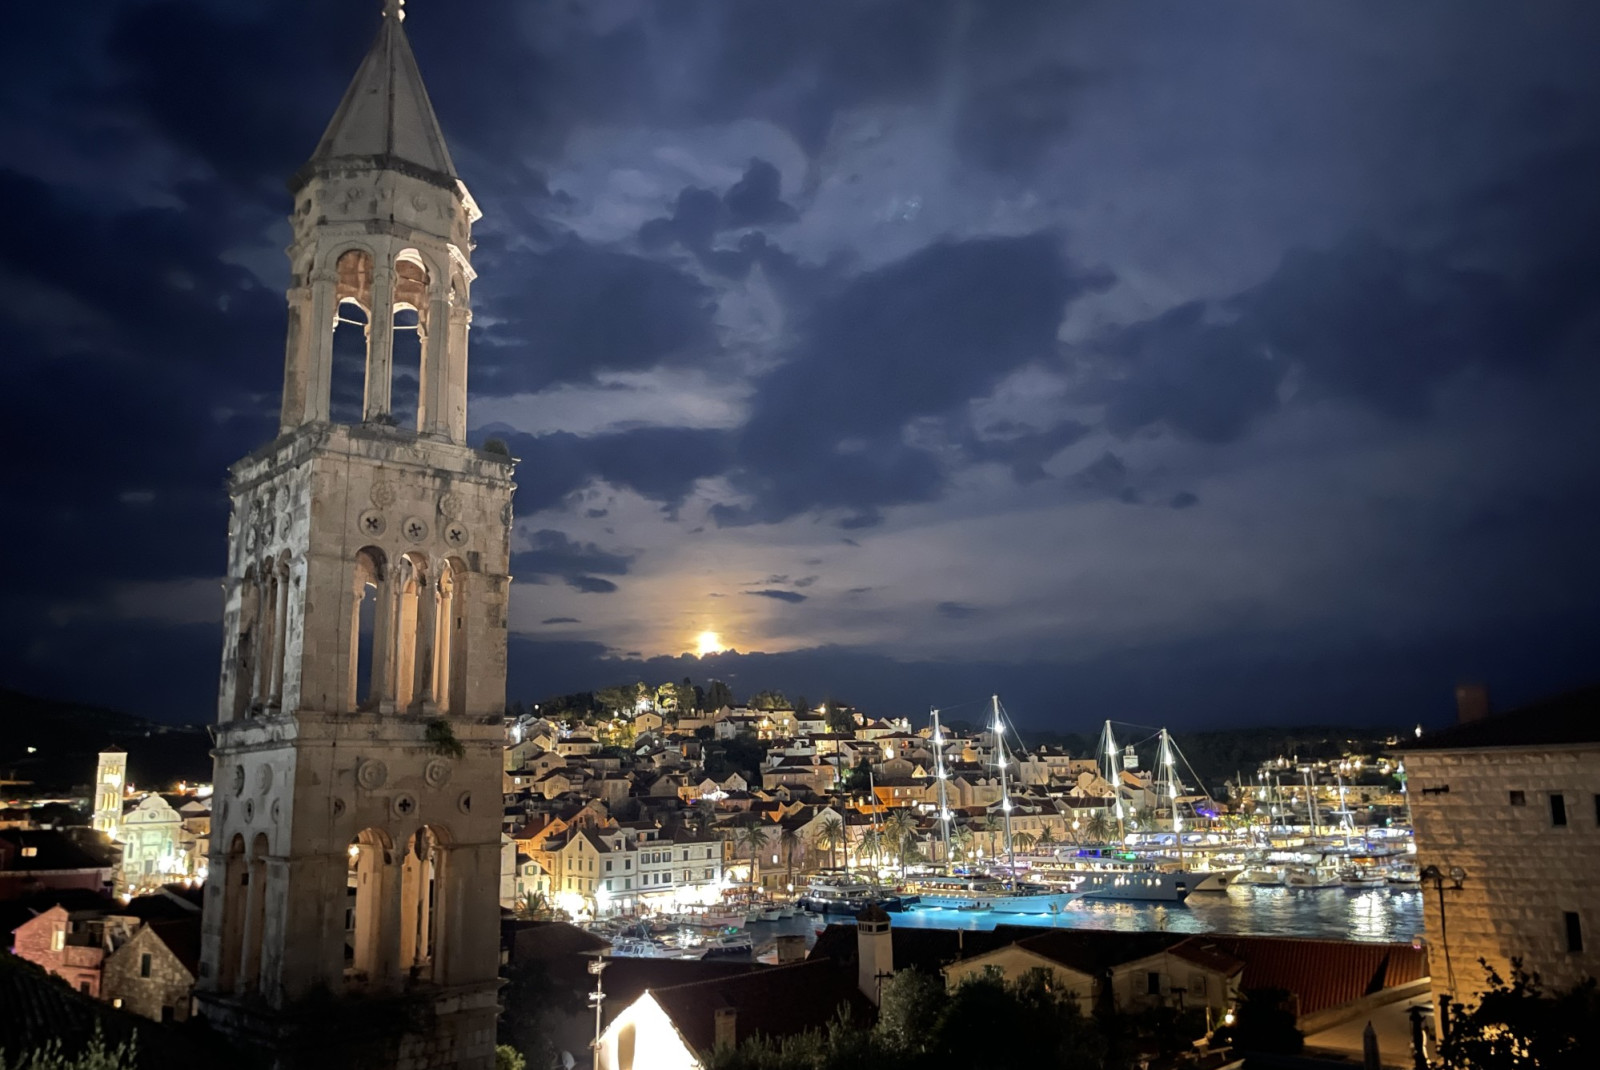 City in Hvar in Croatia at night with sun setting and cloudy sky. 